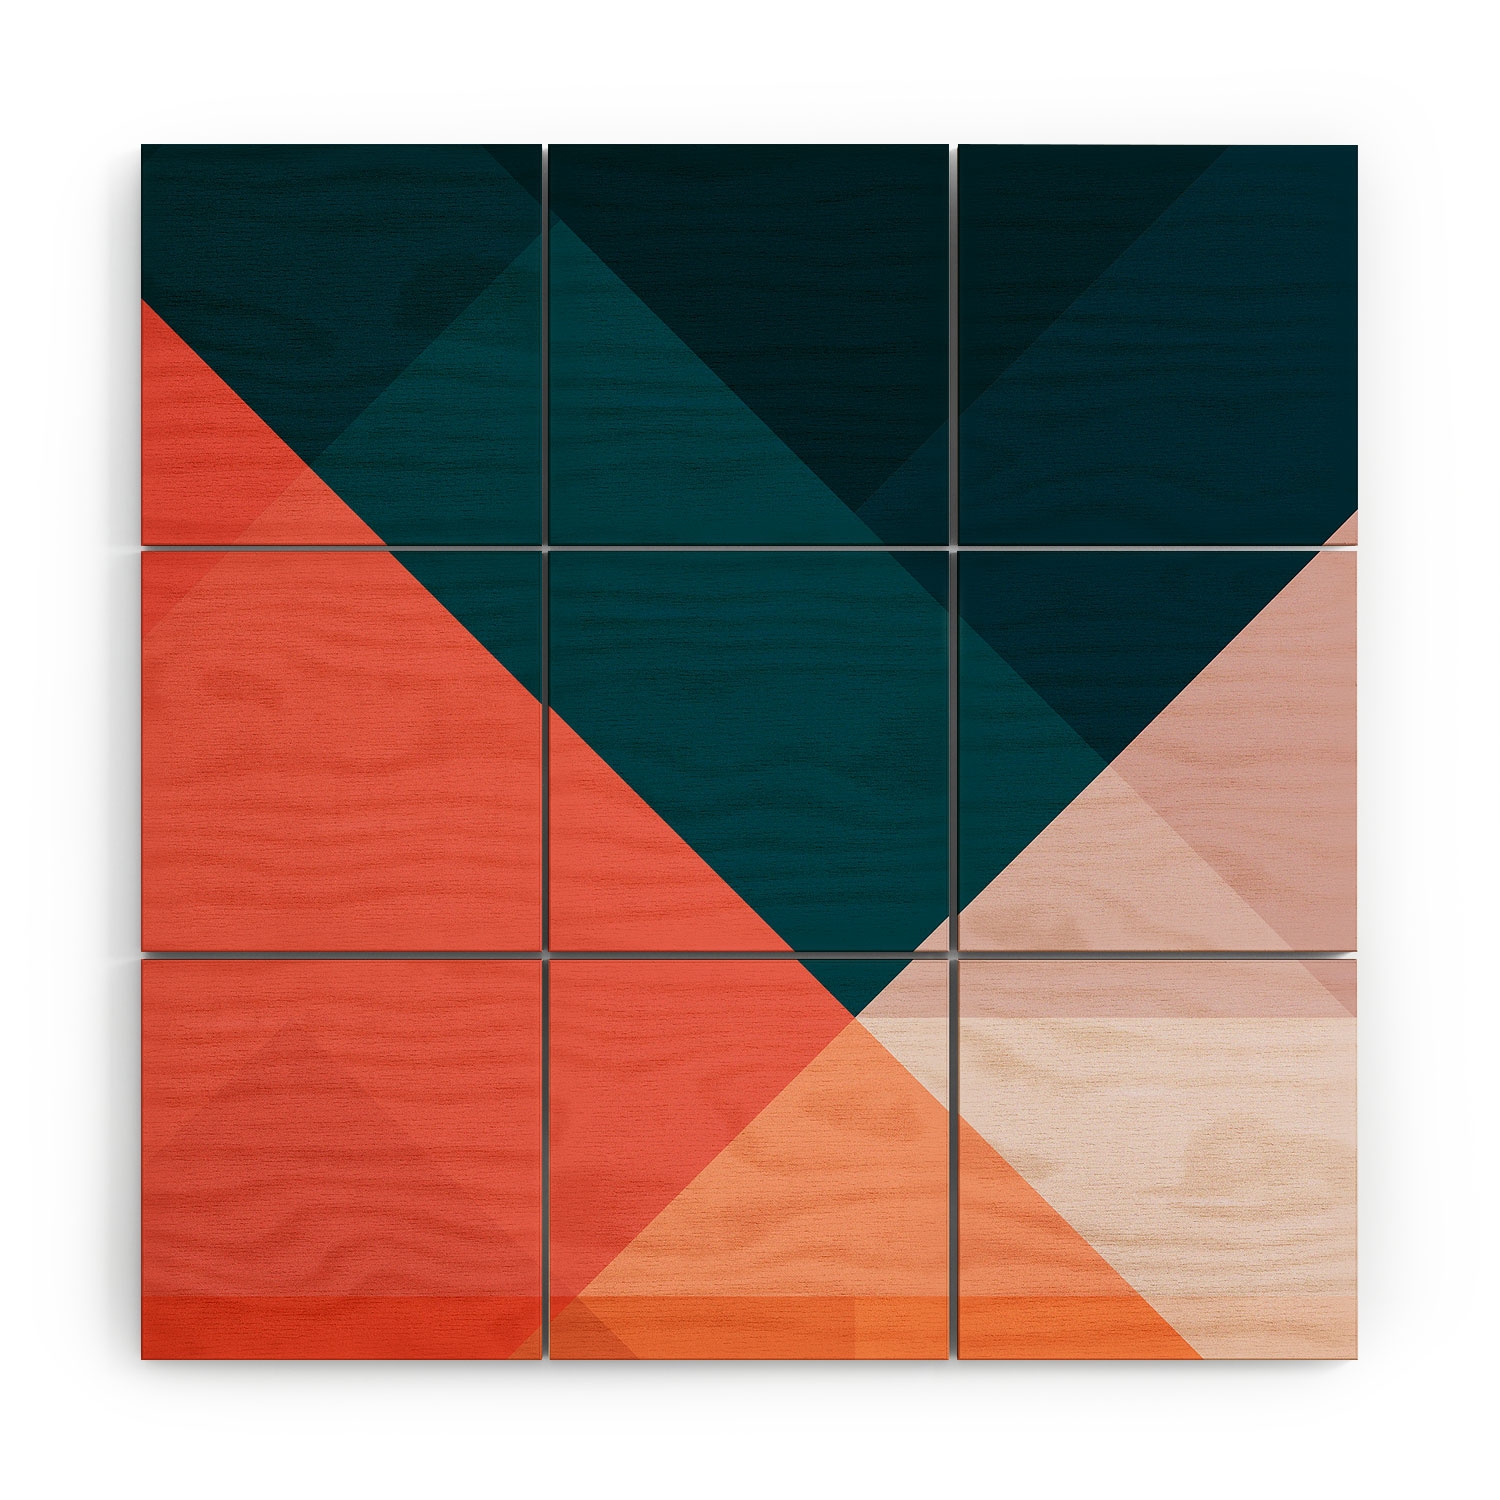 Geometric 1708 by The Old Art Studio - Wood Wall Mural3' X 3' (Nine 12" Wood Squares) - Image 3